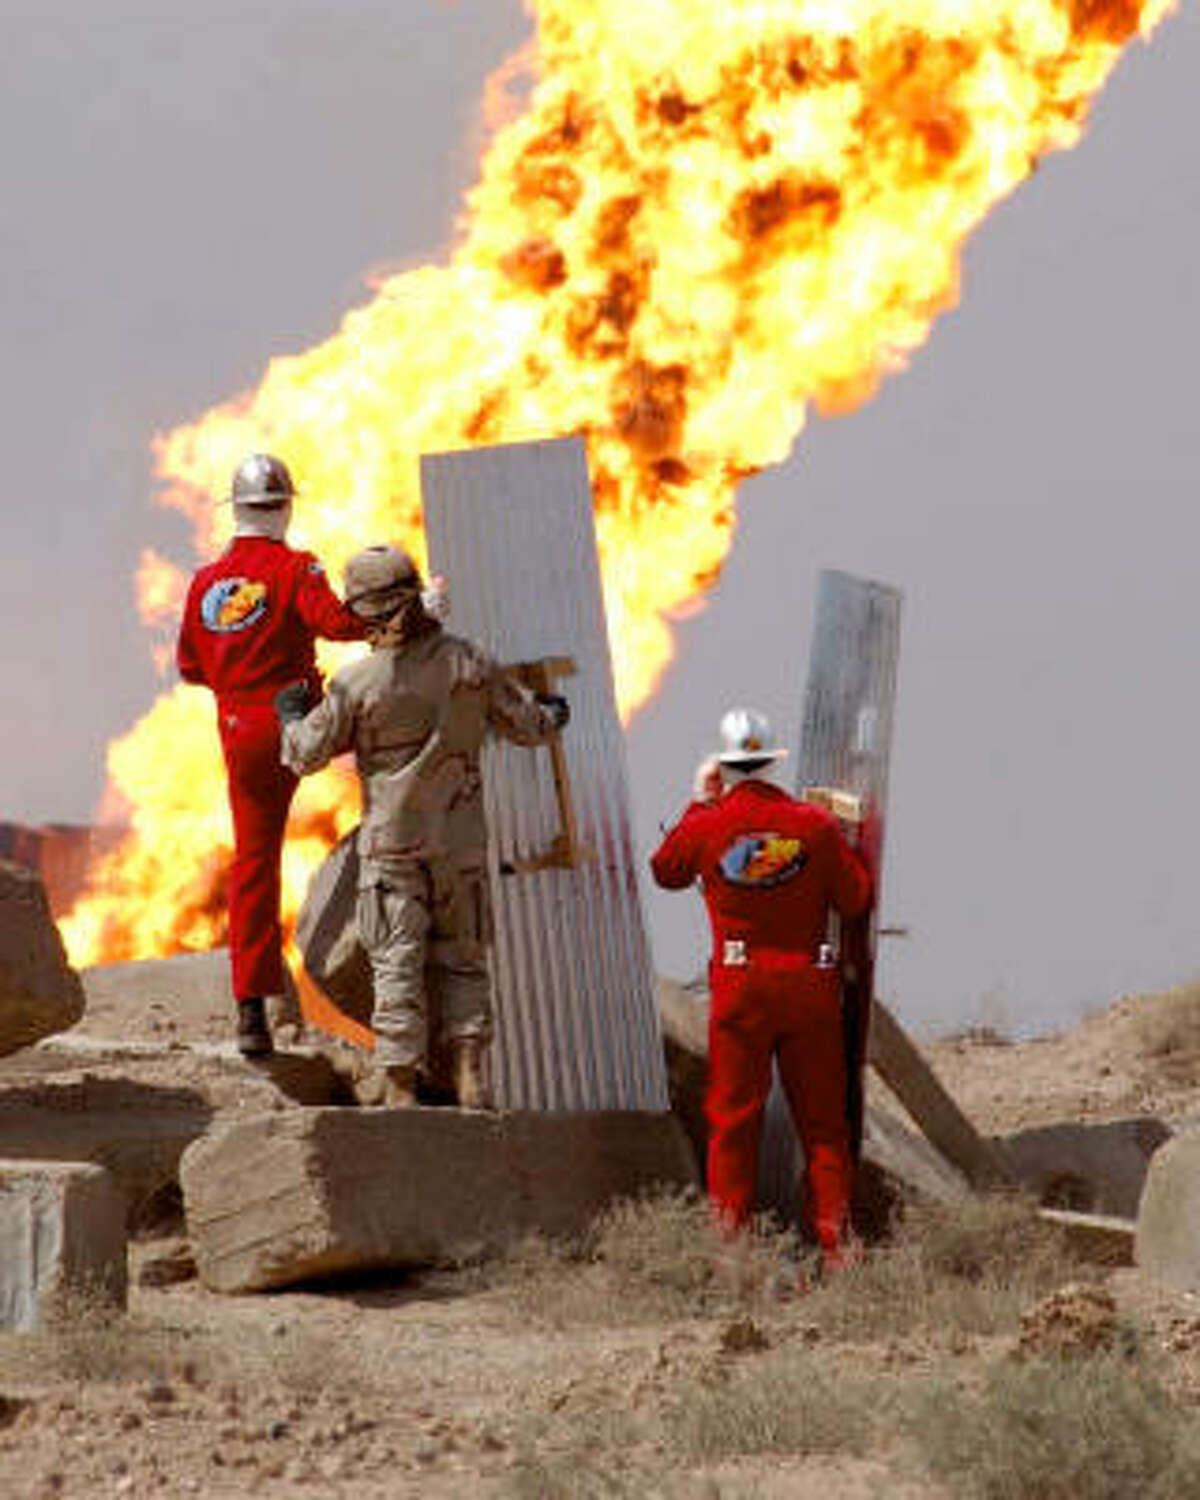 With the firefighting specialist Boots & Coots in its portfolio, Halliburton will have an added tool when seeking jobs. Halliburton's will pay $234 million for the oil field services company.